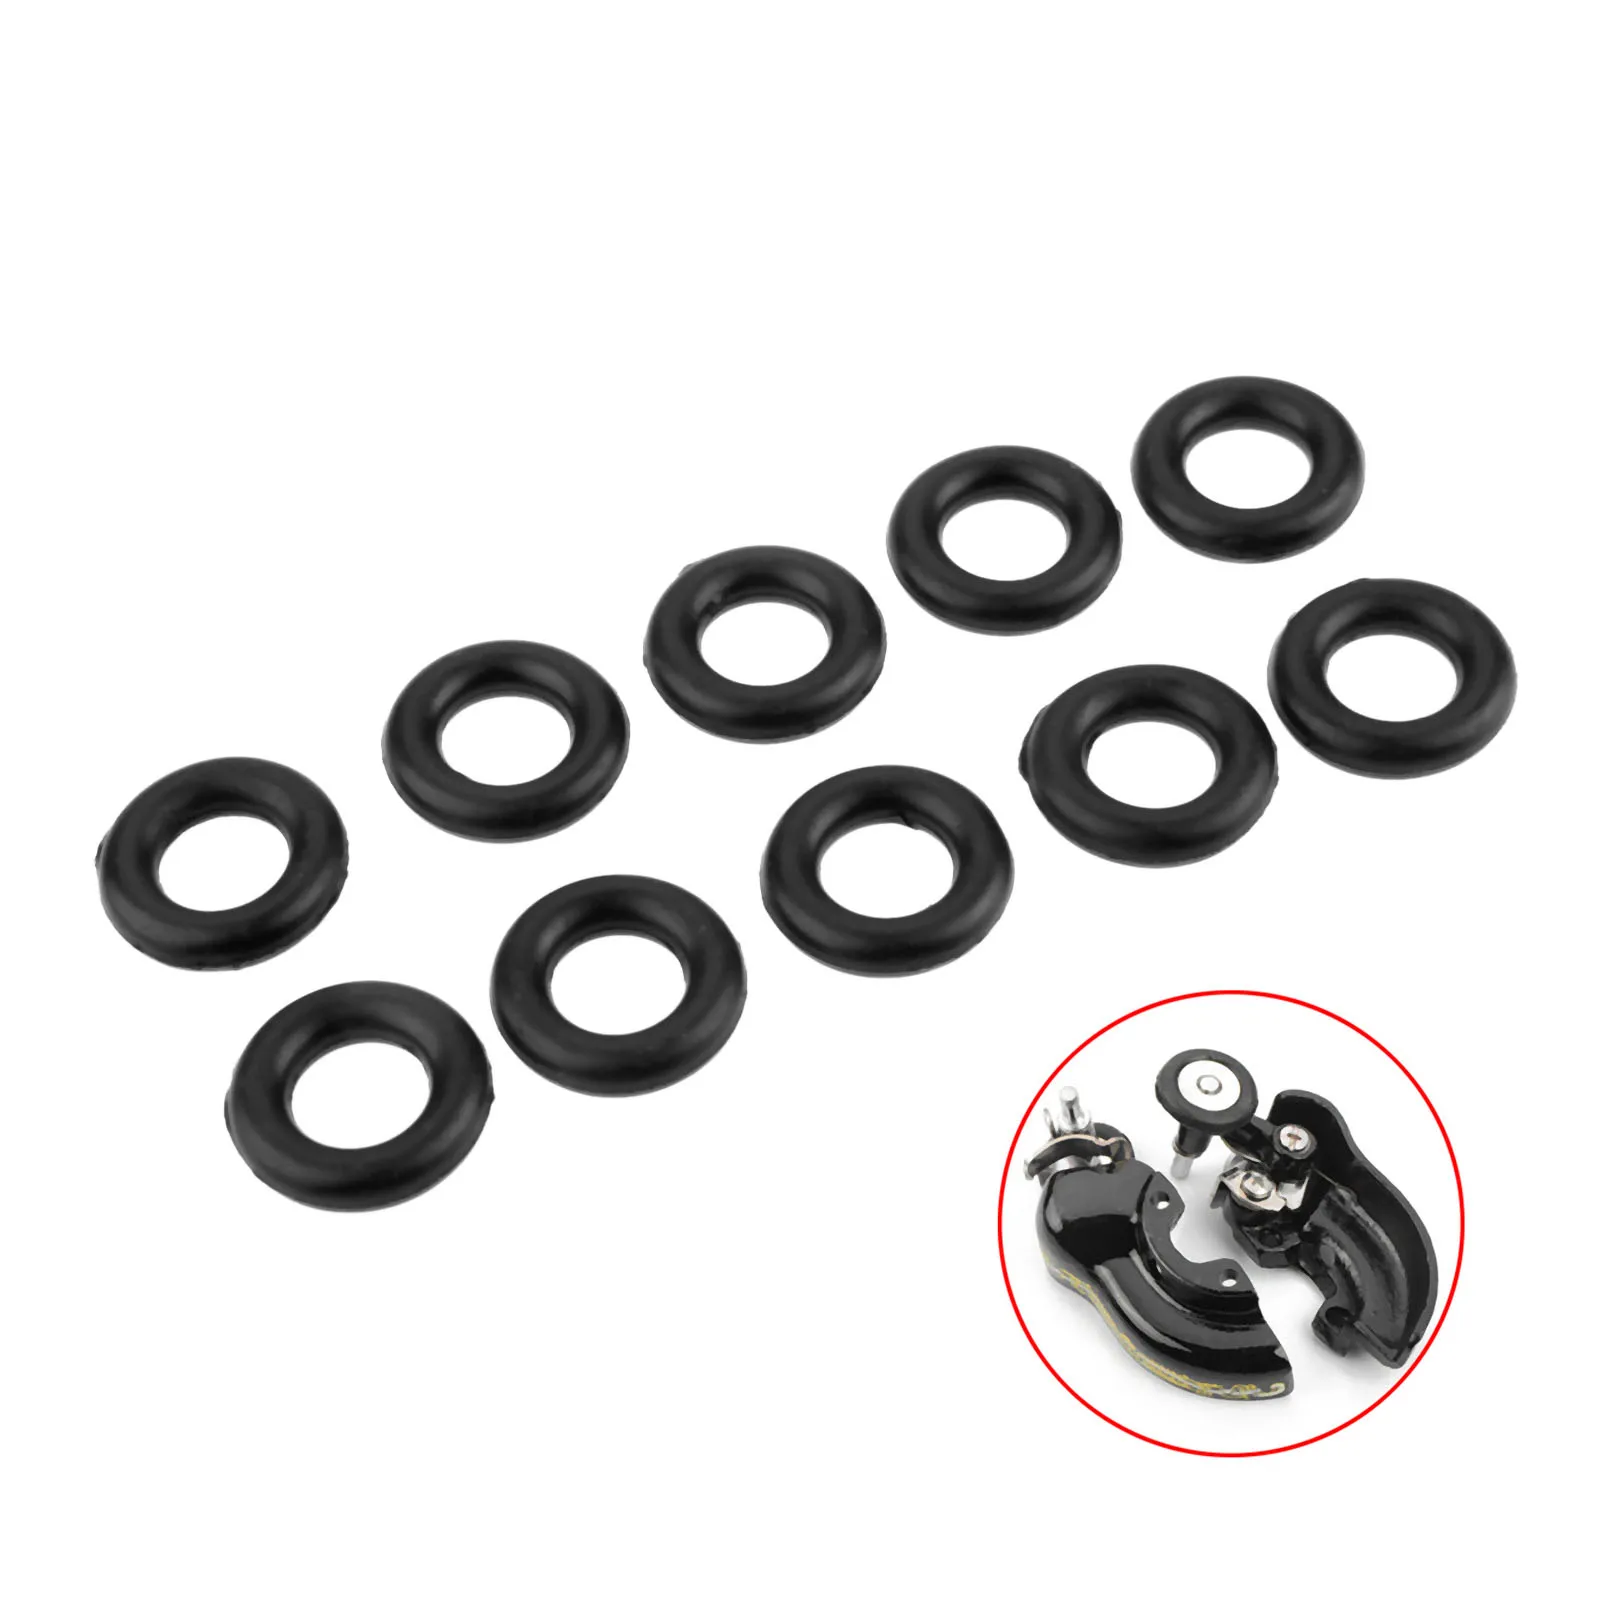 10PCS Sewing Acc Around The Coil Rubber Ring O-ring Bobbin Winder Friction Wheel For Sewing Machine 66/99/201/15/301/401/403/404 images - 6